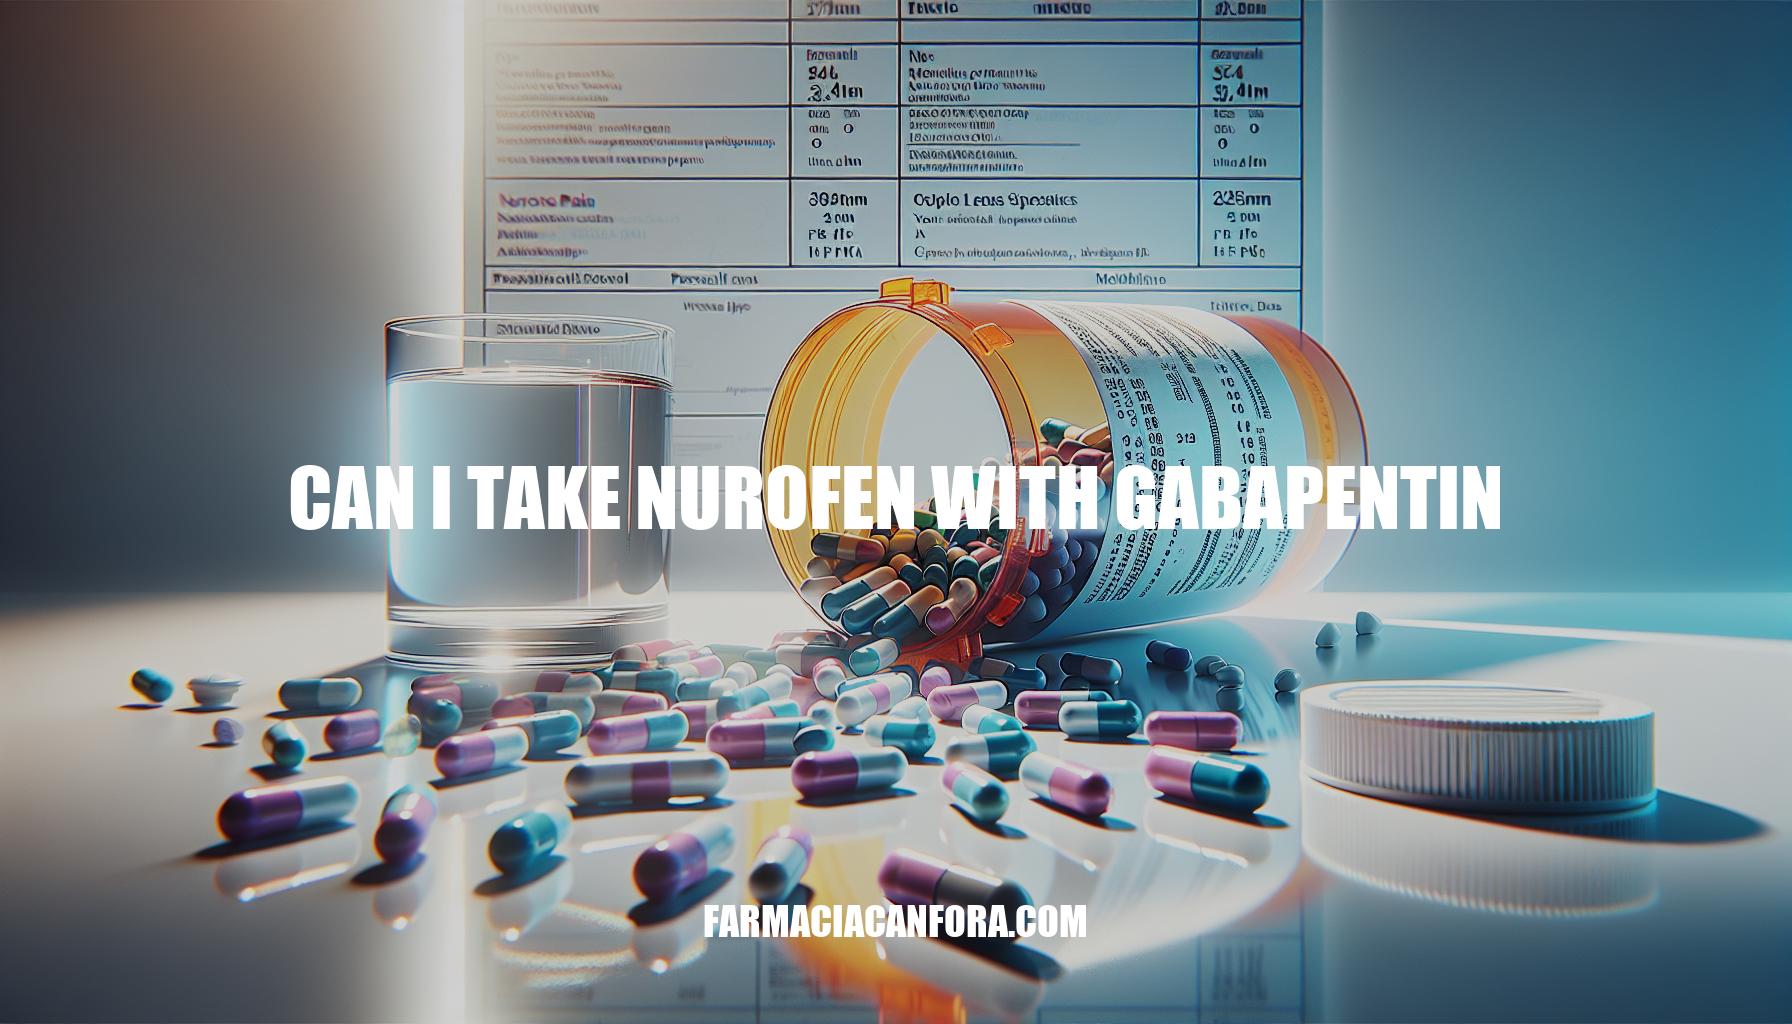 Can I Take Nurofen with Gabapentin: Safety and Considerations